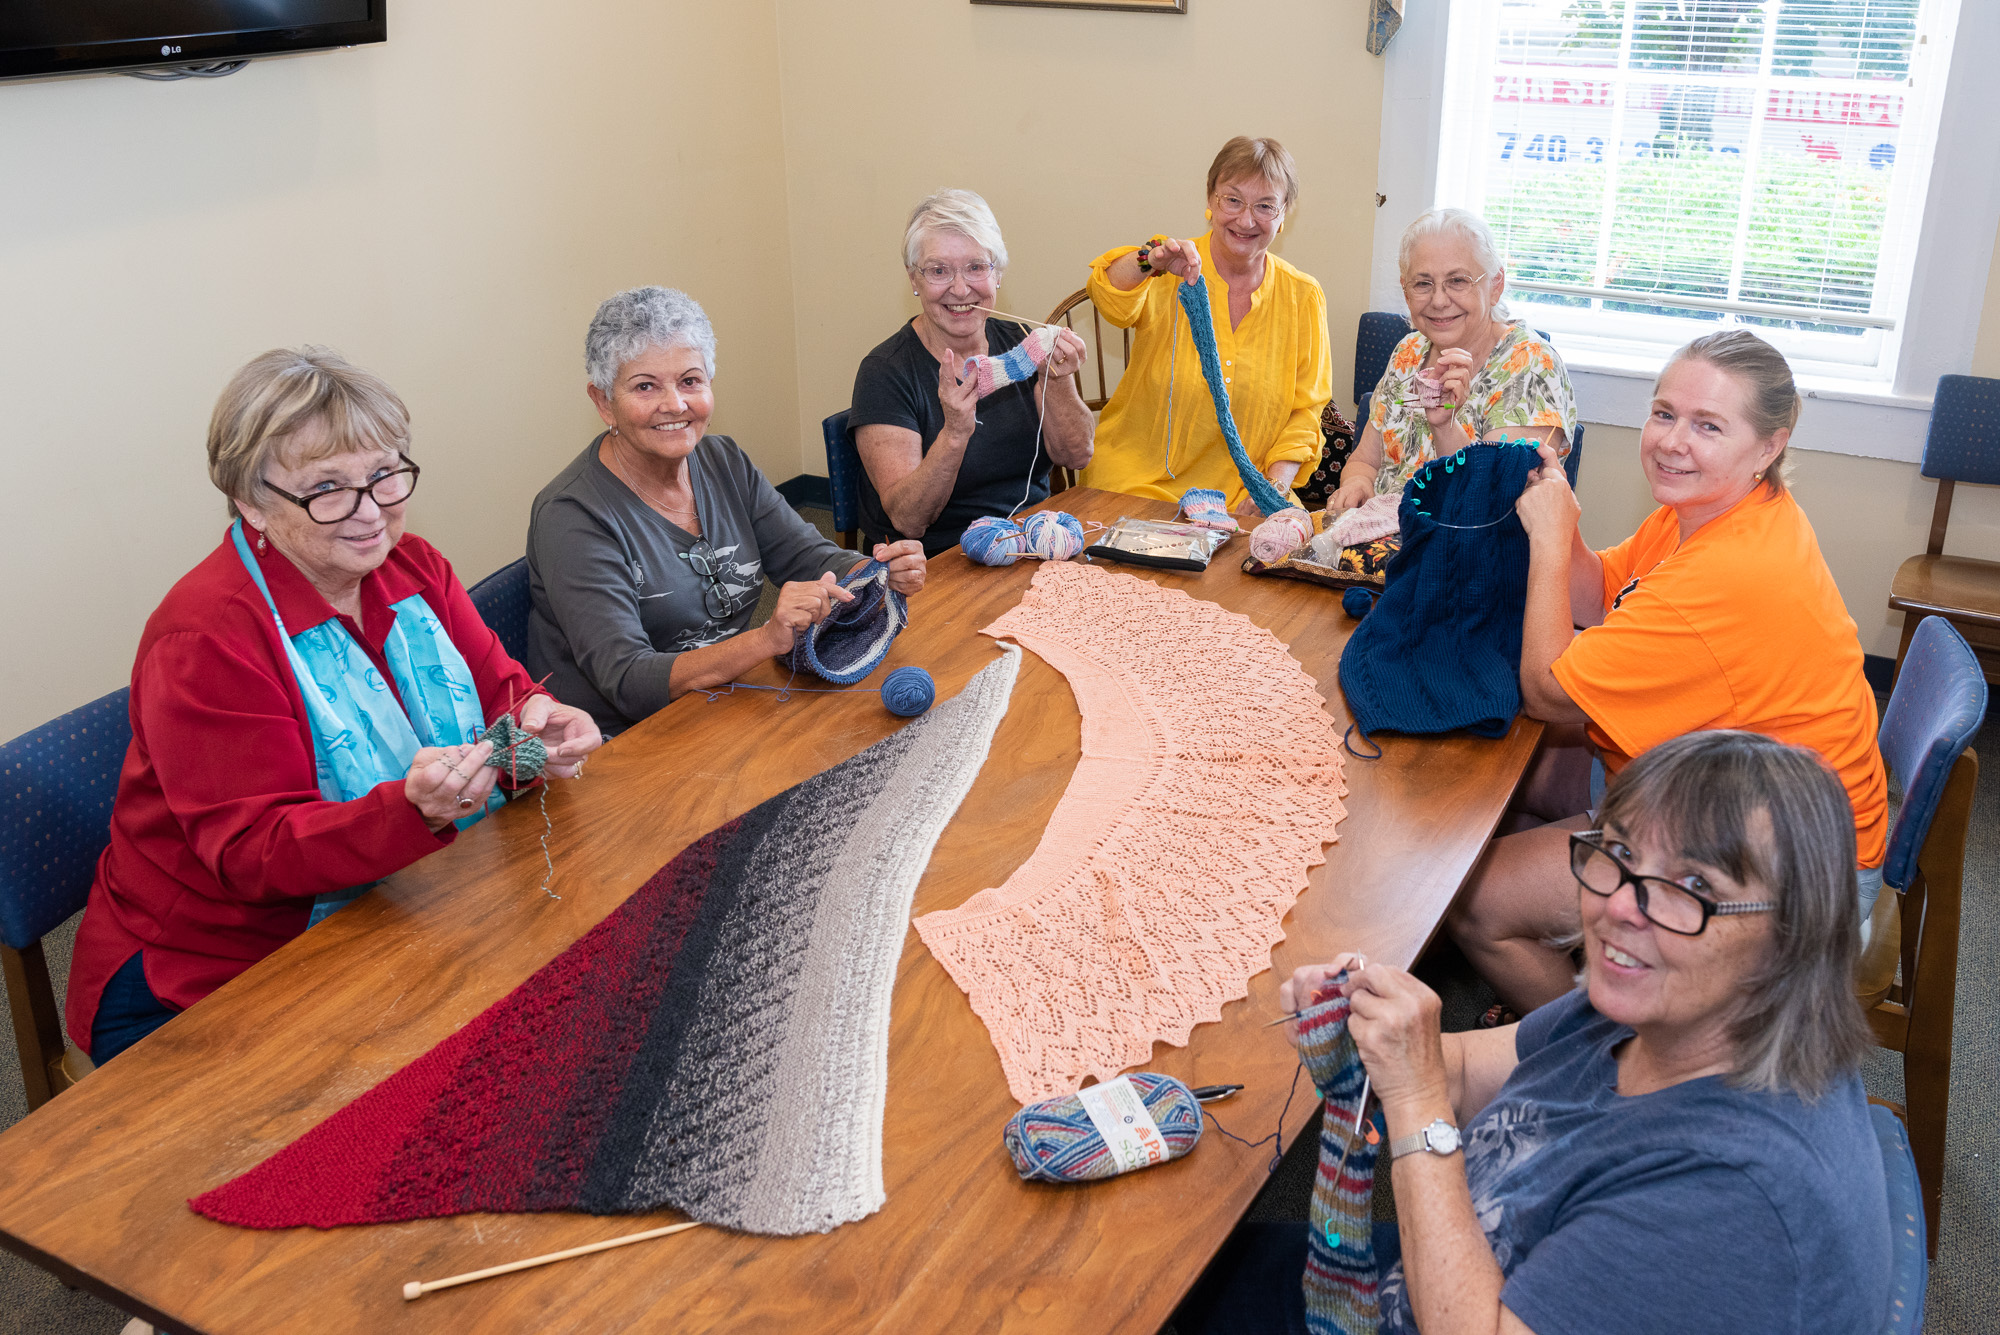 Color photo of knitting session at the Washington Street Meeting Room. Photo shows knitters posing for photograph while displaying their work.